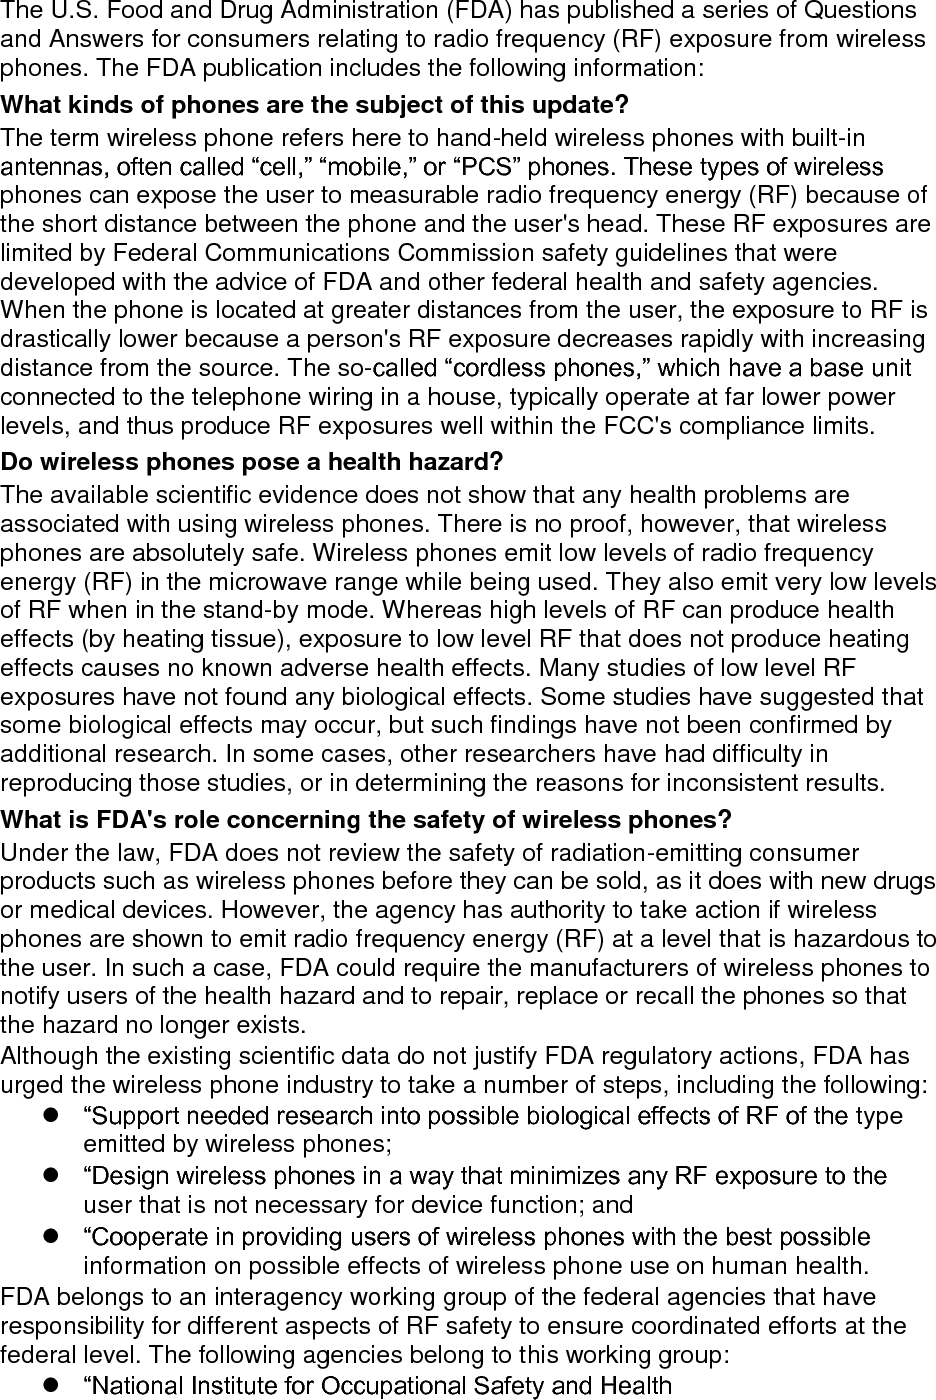 The U.S. Food and Drug Administration (FDA) has published a series of Questions and Answers for consumers relating to radio frequency (RF) exposure from wireless phones. The FDA publication includes the following information: What kinds of phones are the subject of this update? The term wireless phone refers here to hand-held wireless phones with built-in antennas, often called “cell,” “mobile,” or “PCS” phones. These types of wireless phones can expose the user to measurable radio frequency energy (RF) because of the short distance between the phone and the user&apos;s head. These RF exposures are limited by Federal Communications Commission safety guidelines that were developed with the advice of FDA and other federal health and safety agencies. When the phone is located at greater distances from the user, the exposure to RF is drastically lower because a person&apos;s RF exposure decreases rapidly with increasing distance from the source. The so-called “cordless phones,” which have a base unit connected to the telephone wiring in a house, typically operate at far lower power levels, and thus produce RF exposures well within the FCC&apos;s compliance limits. Do wireless phones pose a health hazard? The available scientific evidence does not show that any health problems are associated with using wireless phones. There is no proof, however, that wireless phones are absolutely safe. Wireless phones emit low levels of radio frequency energy (RF) in the microwave range while being used. They also emit very low levels of RF when in the stand-by mode. Whereas high levels of RF can produce health effects (by heating tissue), exposure to low level RF that does not produce heating effects causes no known adverse health effects. Many studies of low level RF exposures have not found any biological effects. Some studies have suggested that some biological effects may occur, but such findings have not been confirmed by additional research. In some cases, other researchers have had difficulty in reproducing those studies, or in determining the reasons for inconsistent results. What is FDA&apos;s role concerning the safety of wireless phones? Under the law, FDA does not review the safety of radiation-emitting consumer products such as wireless phones before they can be sold, as it does with new drugs or medical devices. However, the agency has authority to take action if wireless phones are shown to emit radio frequency energy (RF) at a level that is hazardous to the user. In such a case, FDA could require the manufacturers of wireless phones to notify users of the health hazard and to repair, replace or recall the phones so that the hazard no longer exists. Although the existing scientific data do not justify FDA regulatory actions, FDA has urged the wireless phone industry to take a number of steps, including the following:  “Support needed research into possible biological effects of RF of the type emitted by wireless phones;  “Design wireless phones in a way that minimizes any RF exposure to the user that is not necessary for device function; and  “Cooperate in providing users of wireless phones with the best possible information on possible effects of wireless phone use on human health. FDA belongs to an interagency working group of the federal agencies that have responsibility for different aspects of RF safety to ensure coordinated efforts at the federal level. The following agencies belong to this working group:  “National Institute for Occupational Safety and Health 